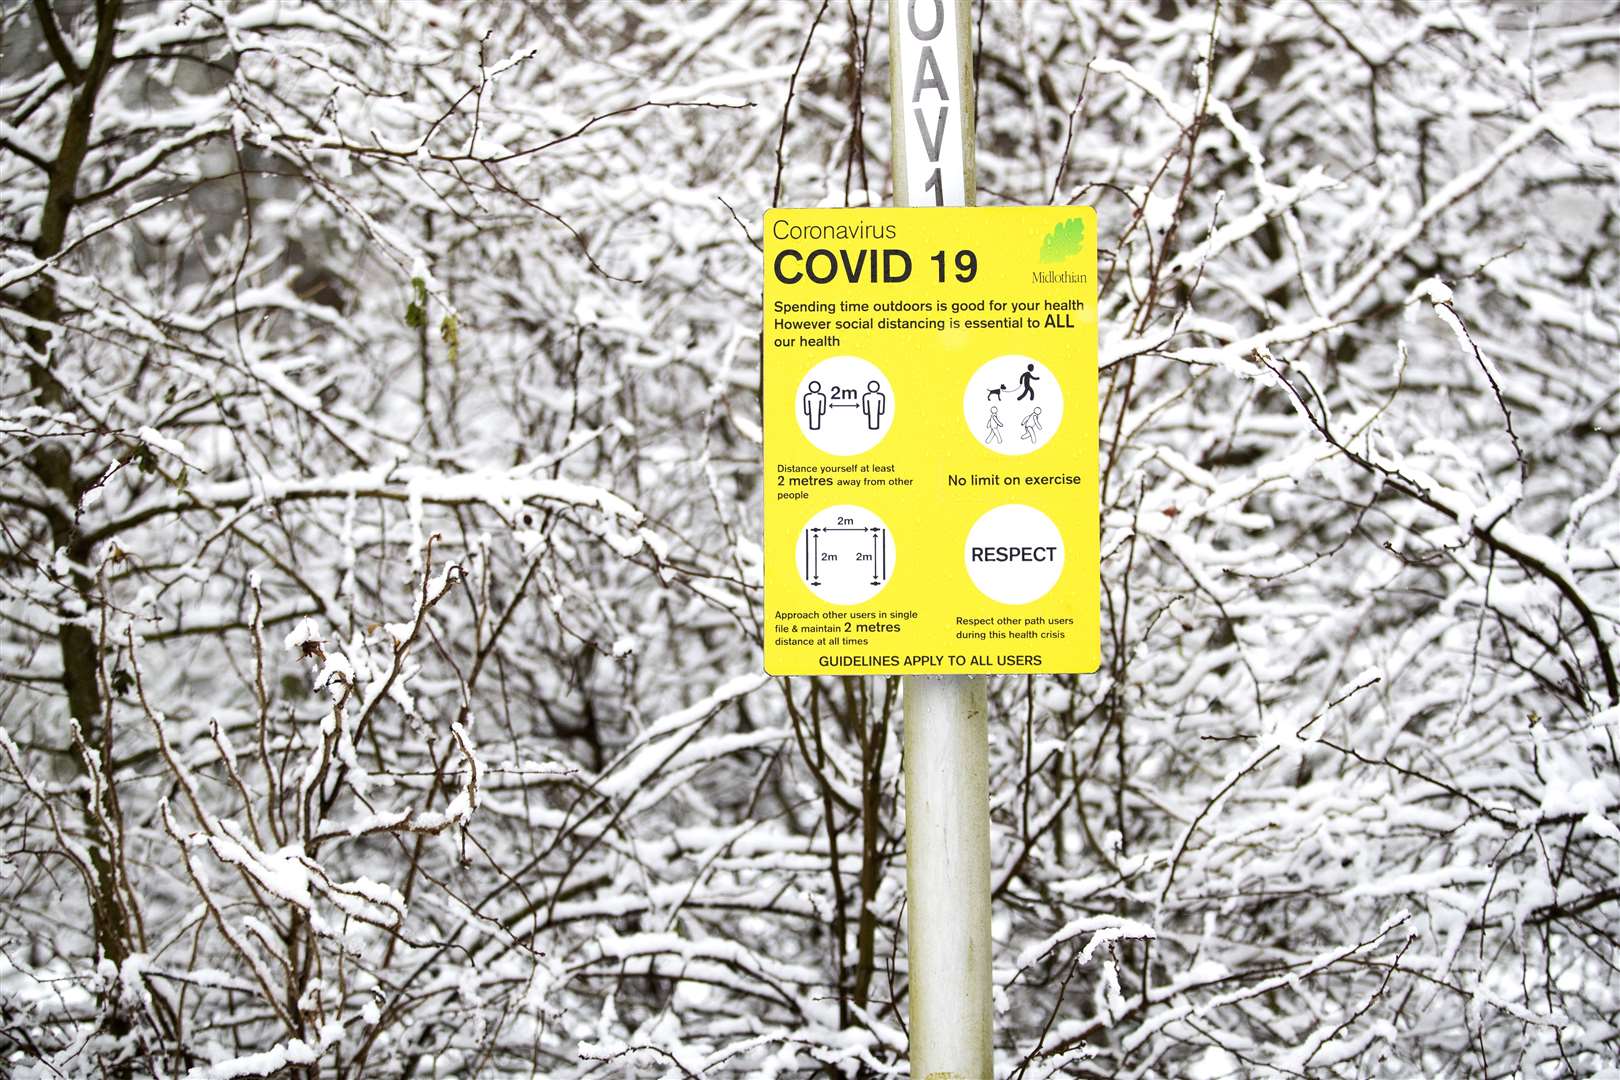 A coronavirus information sign surrounded by snow in Auchendinny, Midlothian (Jane Barlow/PA)